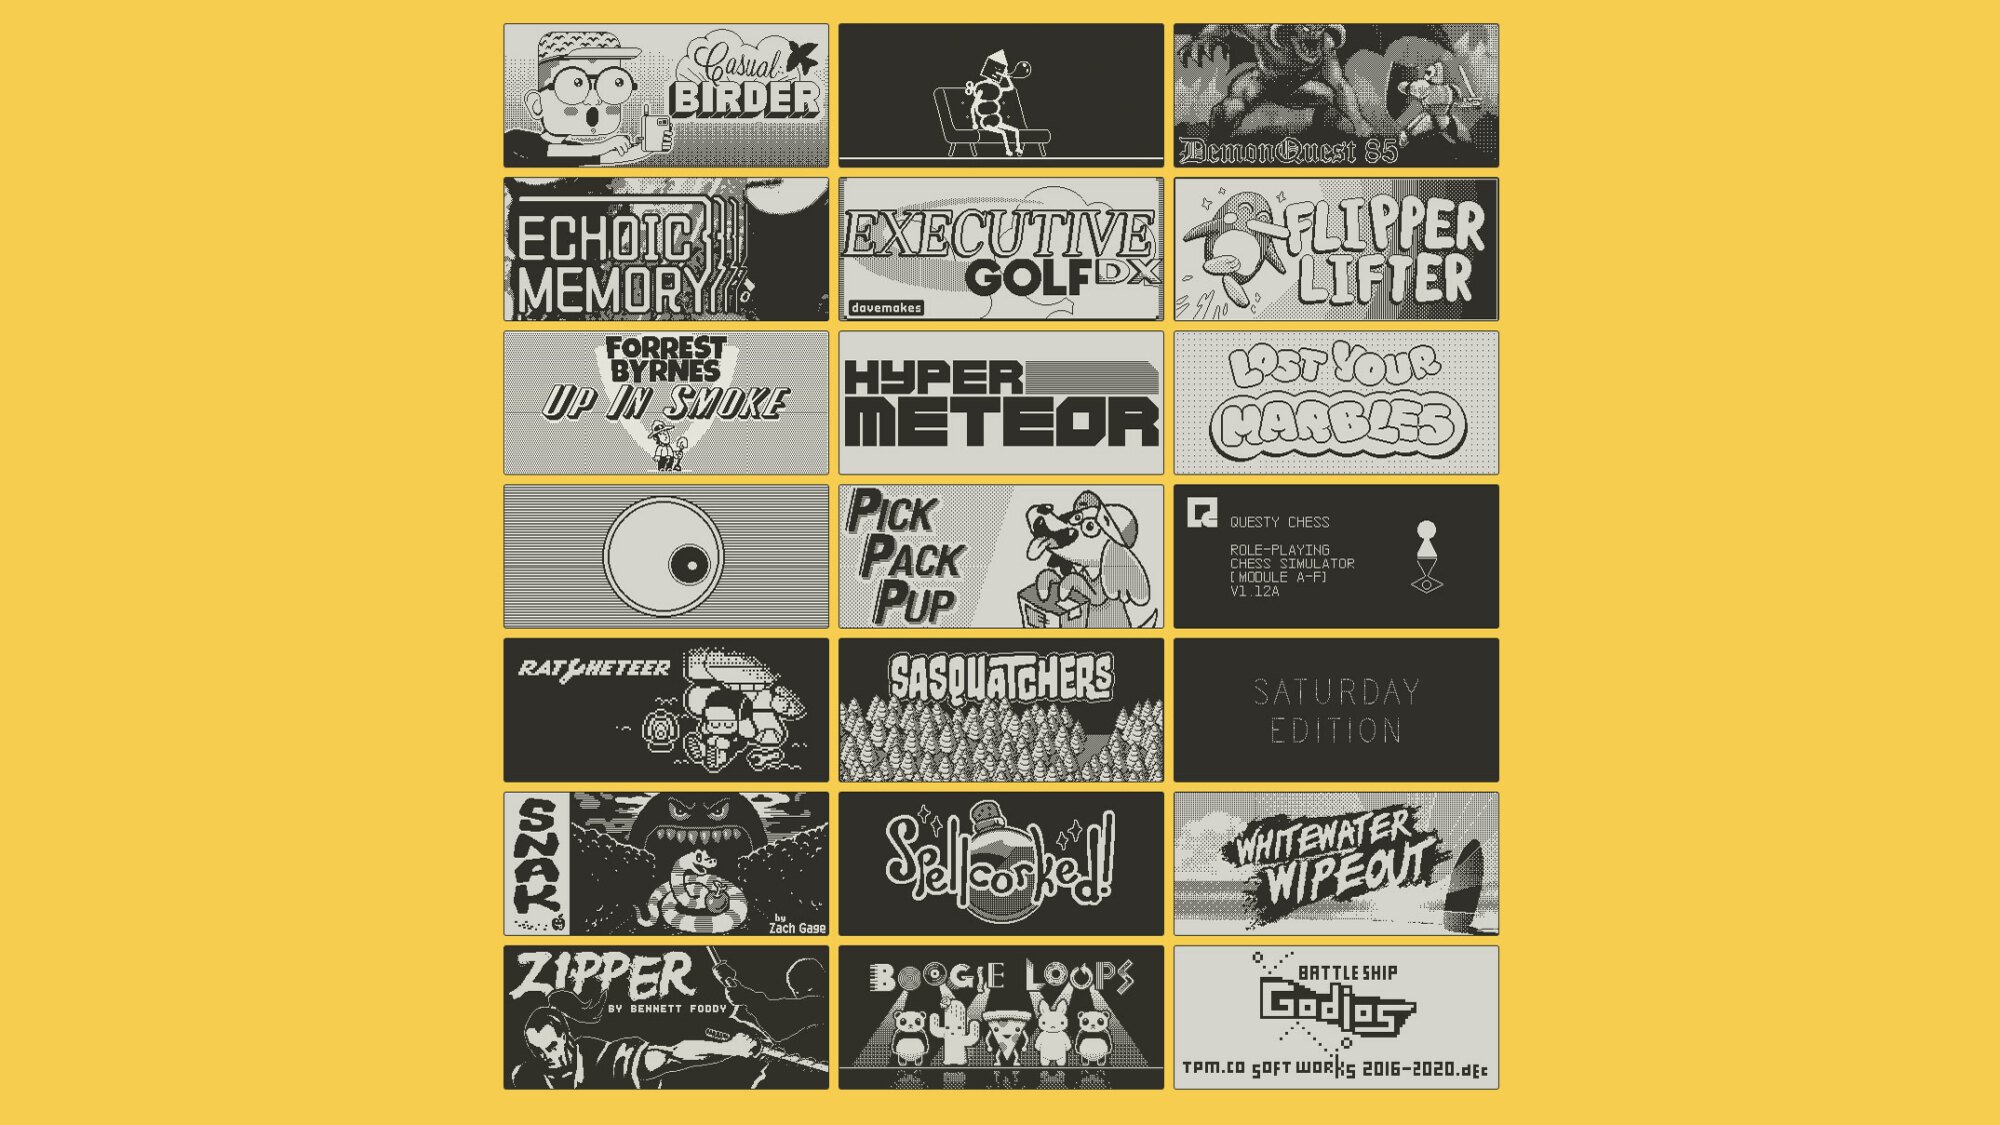 A look at the Playdate game library. 24 monochrome tiles featuring each game title and cover art.